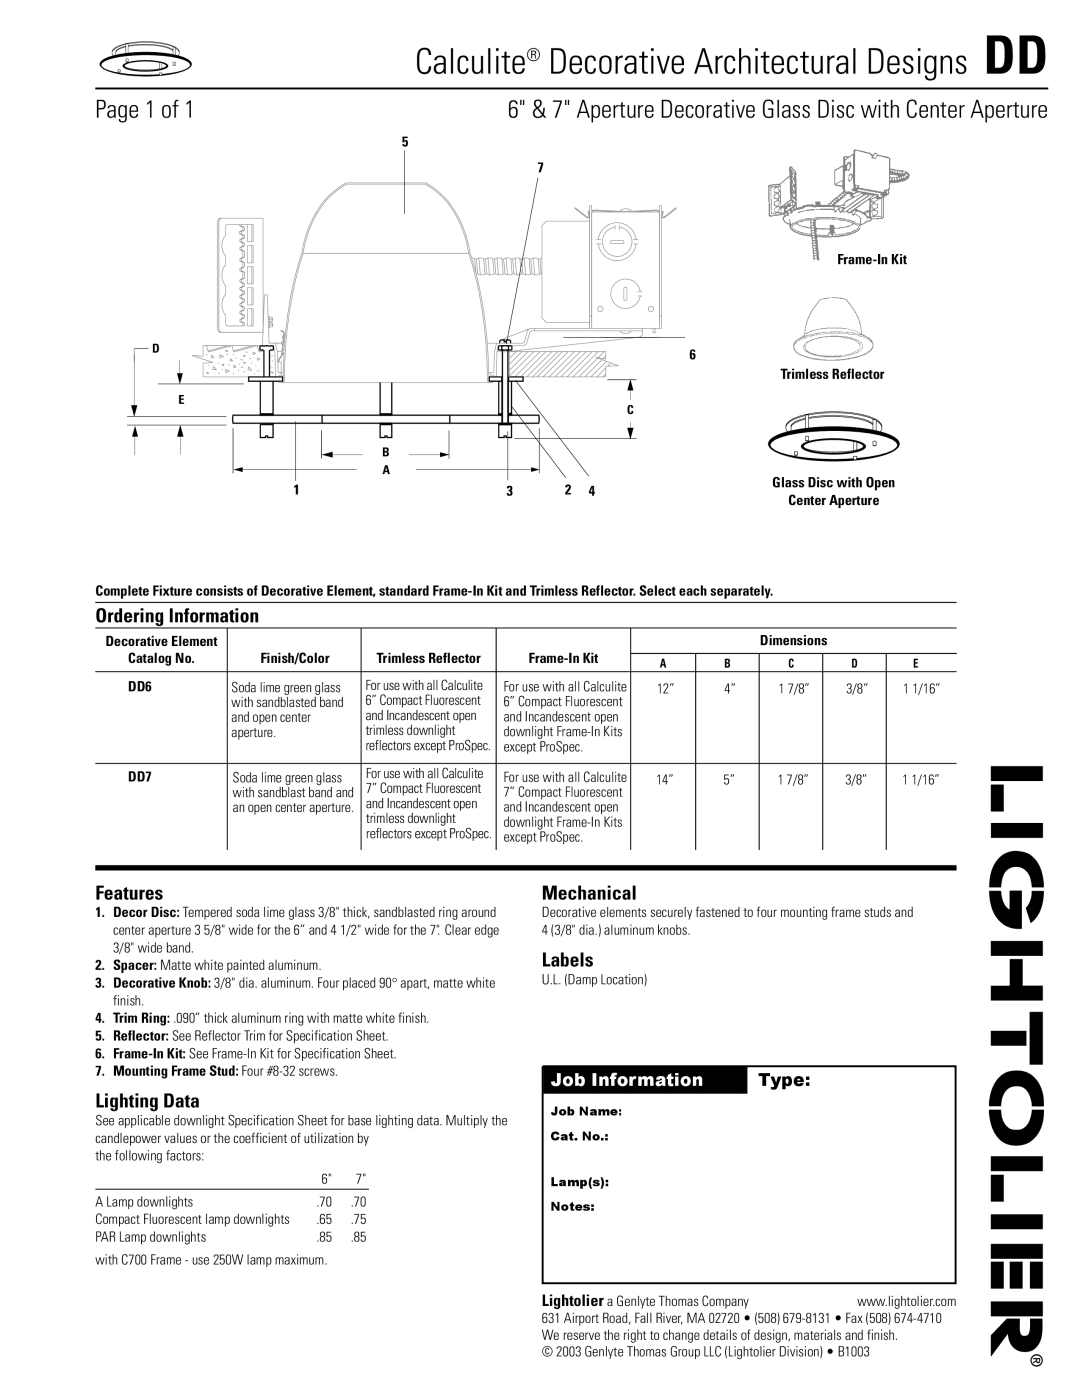 Lightolier dimensions Calculite Decorative Architectural Designs DD, Page 1 of, Ordering Information, Features, Labels 